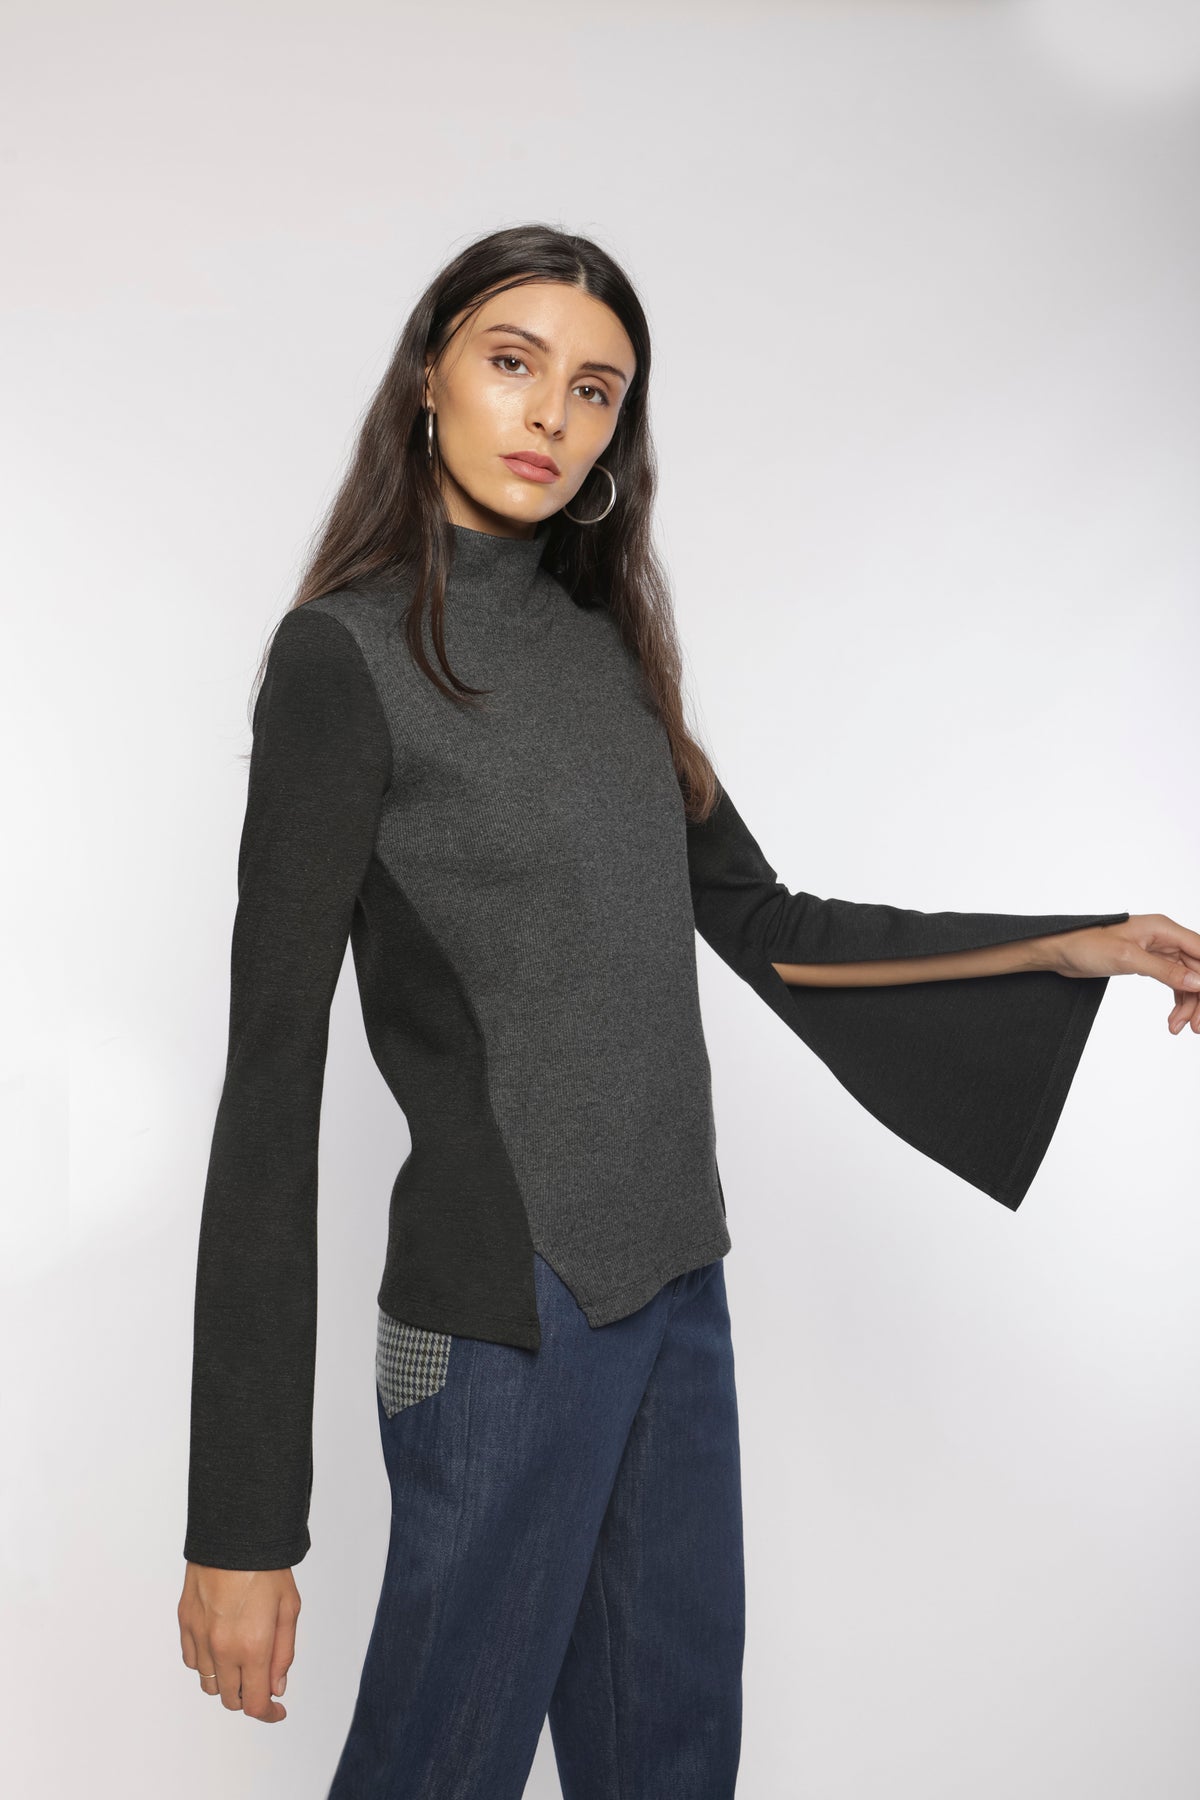 Architectural knit top